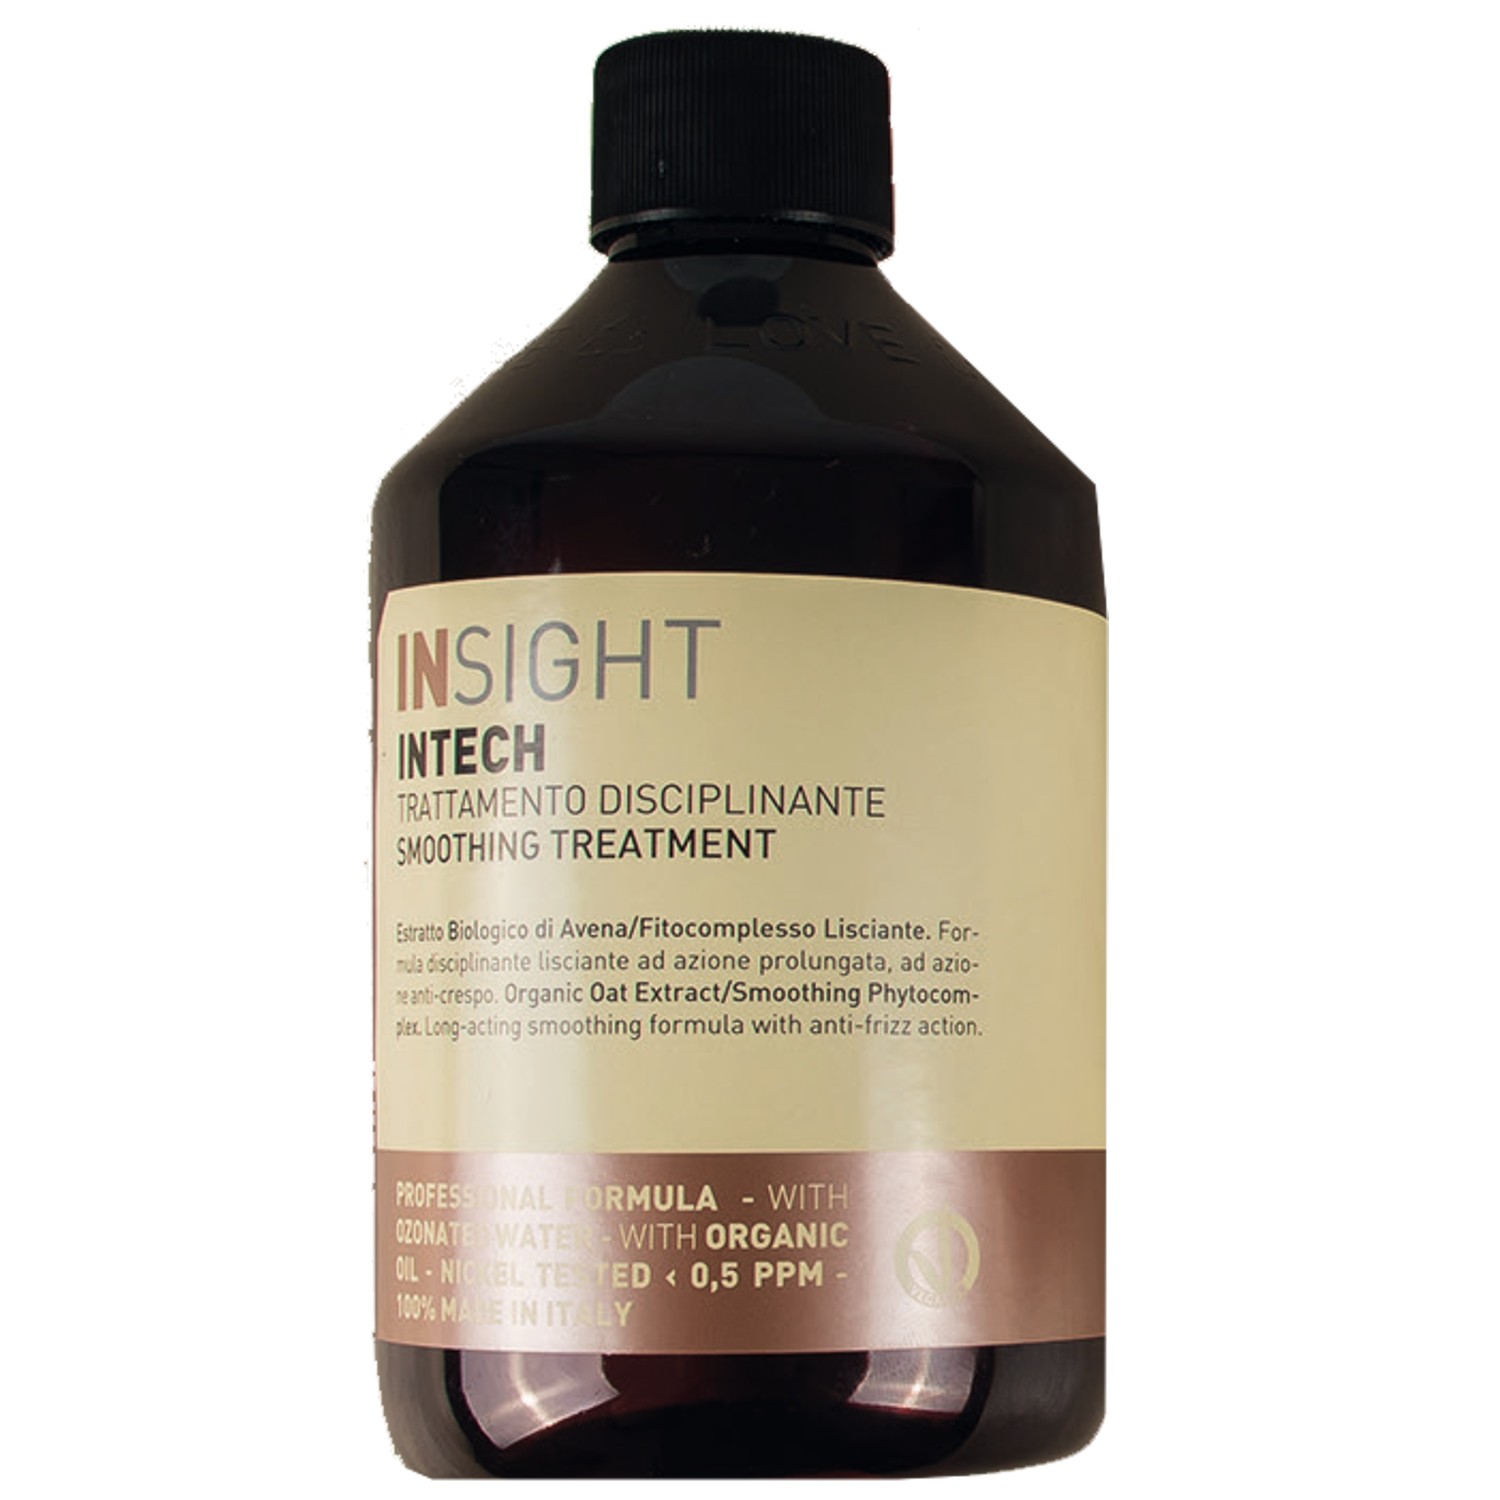 Insight INTECH Smoothing Treatment 400 ml